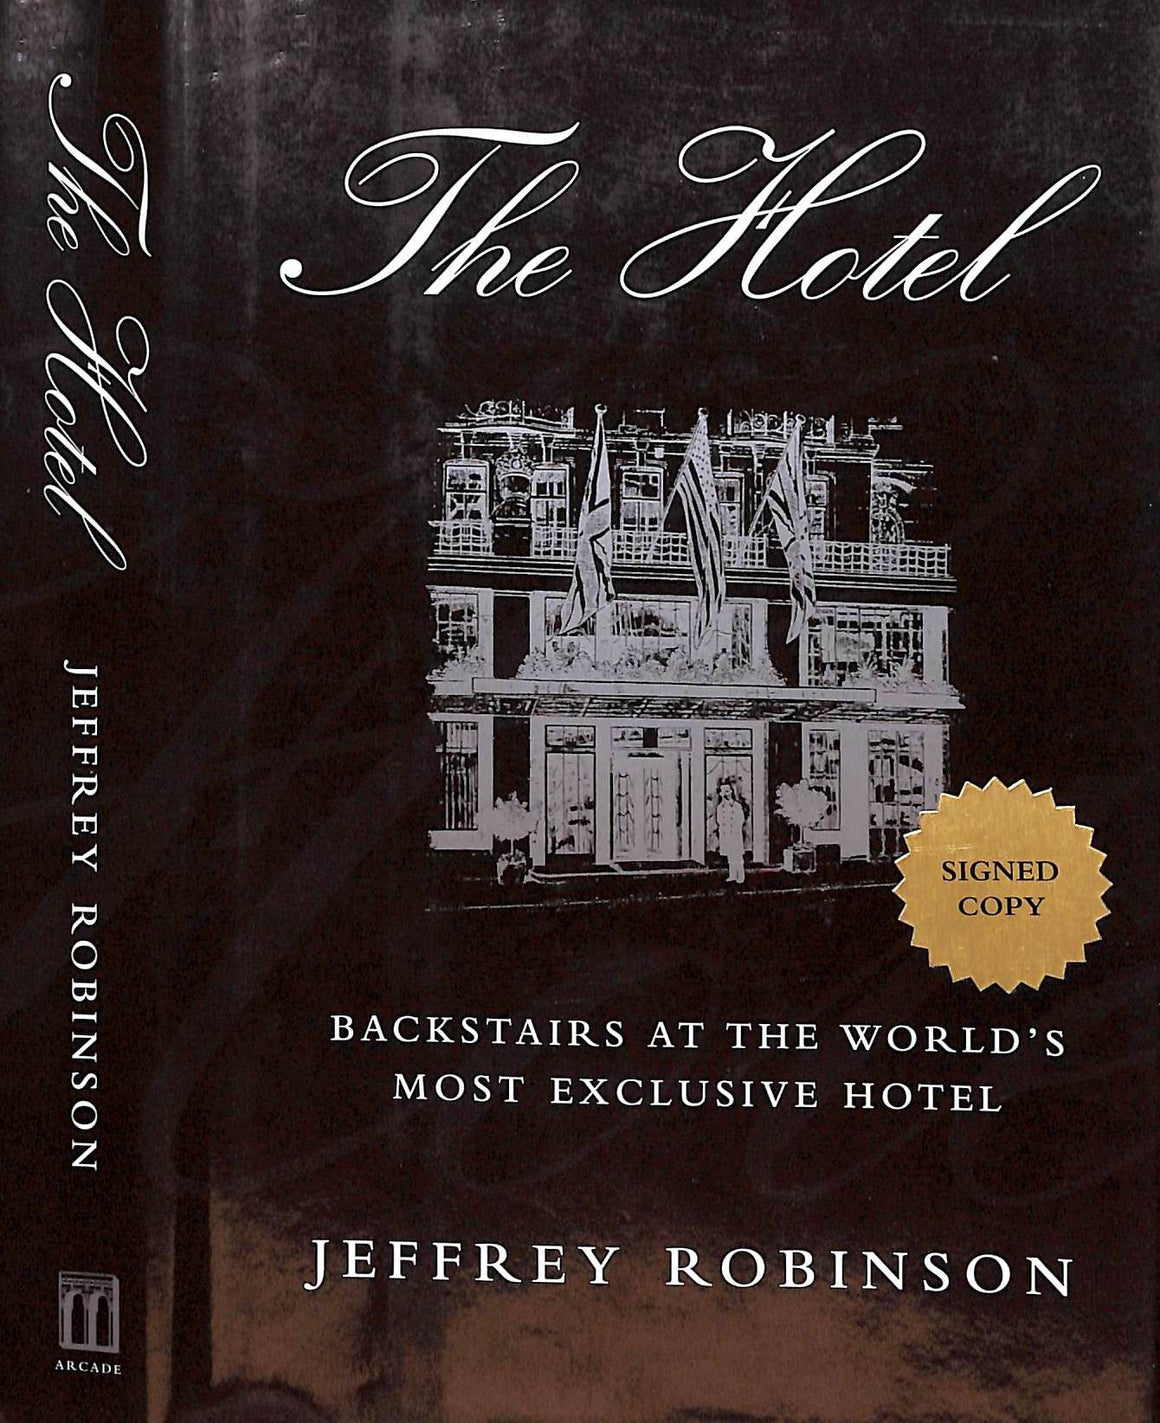 "The Hotel: Backstairs At The World's Most Exclusive Hotel" 1997 ROBINSON, Jeffrey (SIGNED)